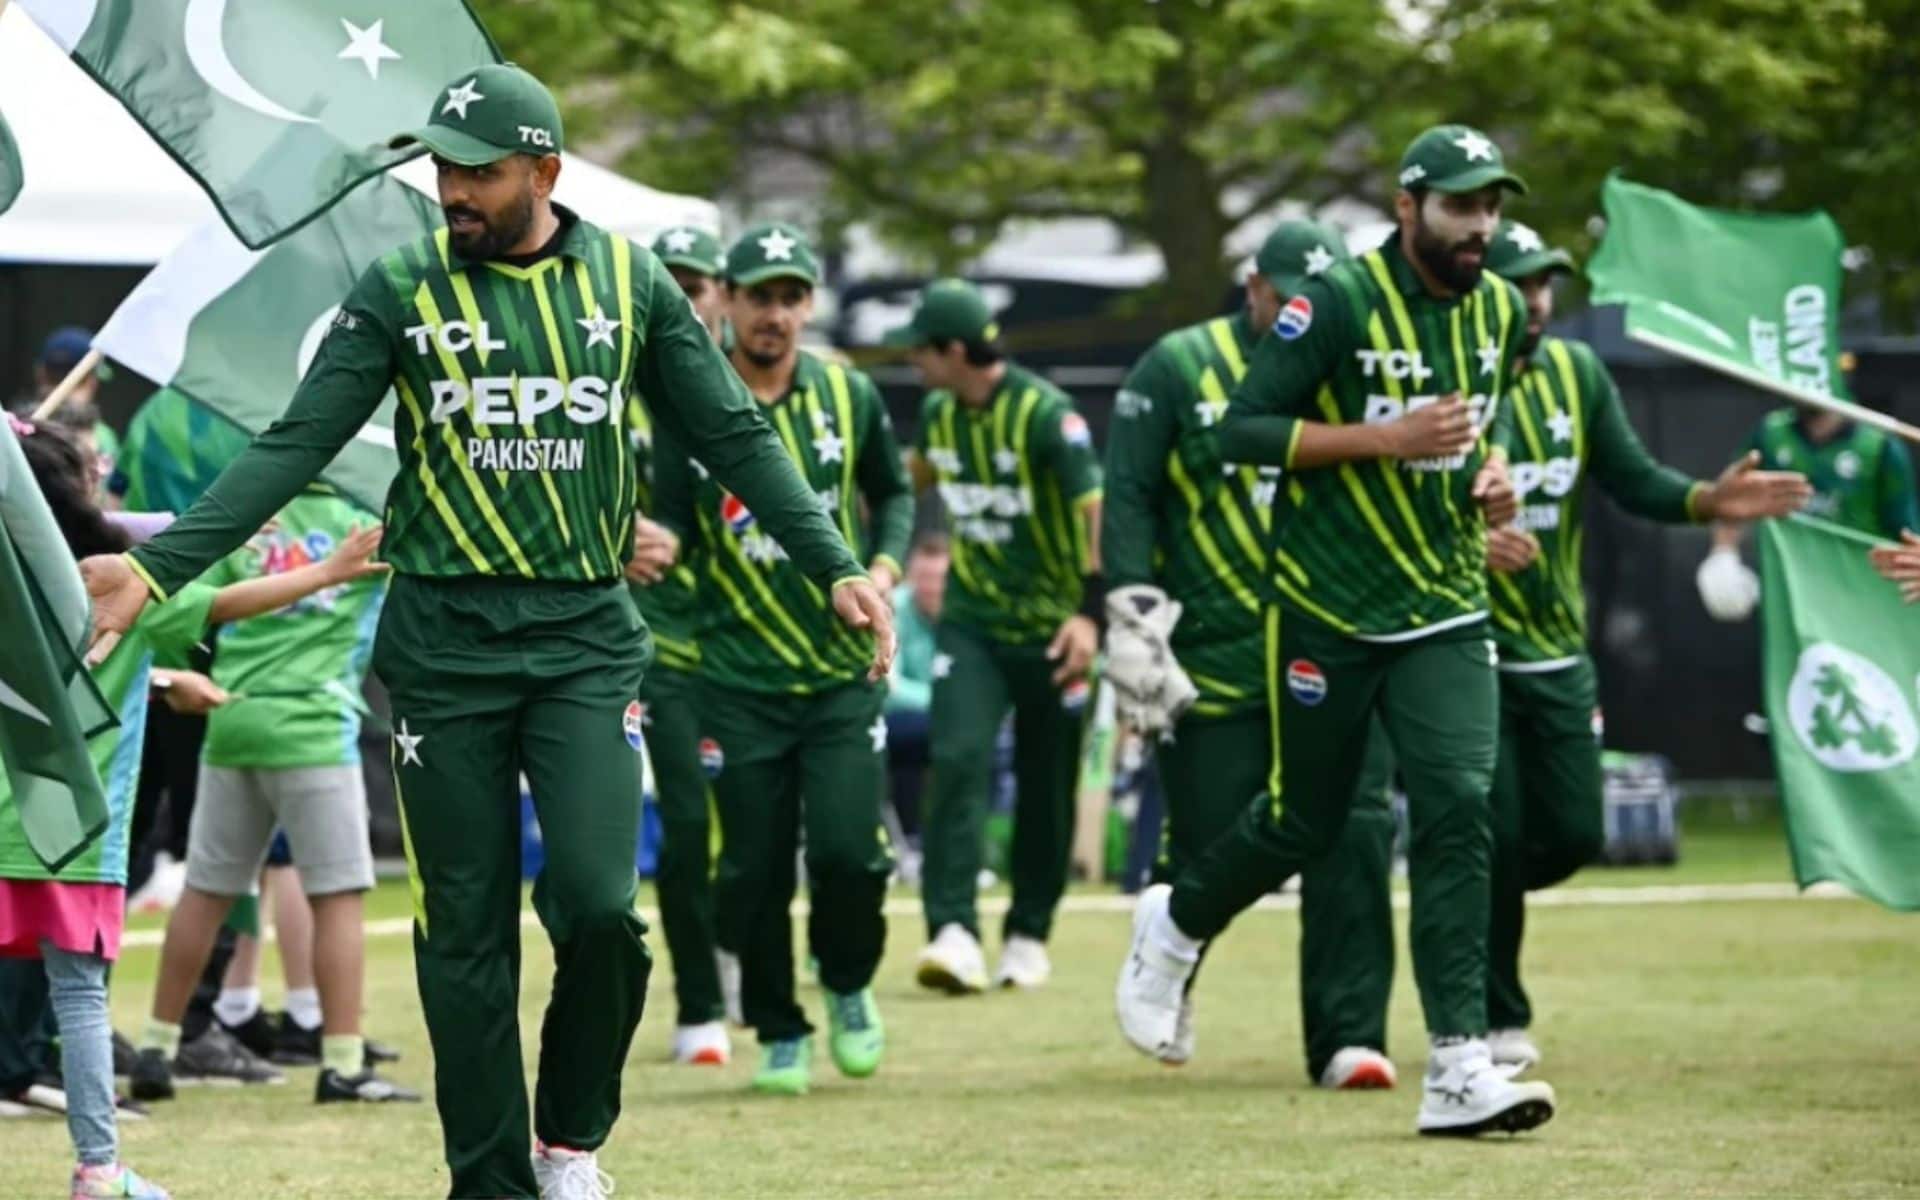 Pakistan players during their T20I series in Ireland in May (x.com)